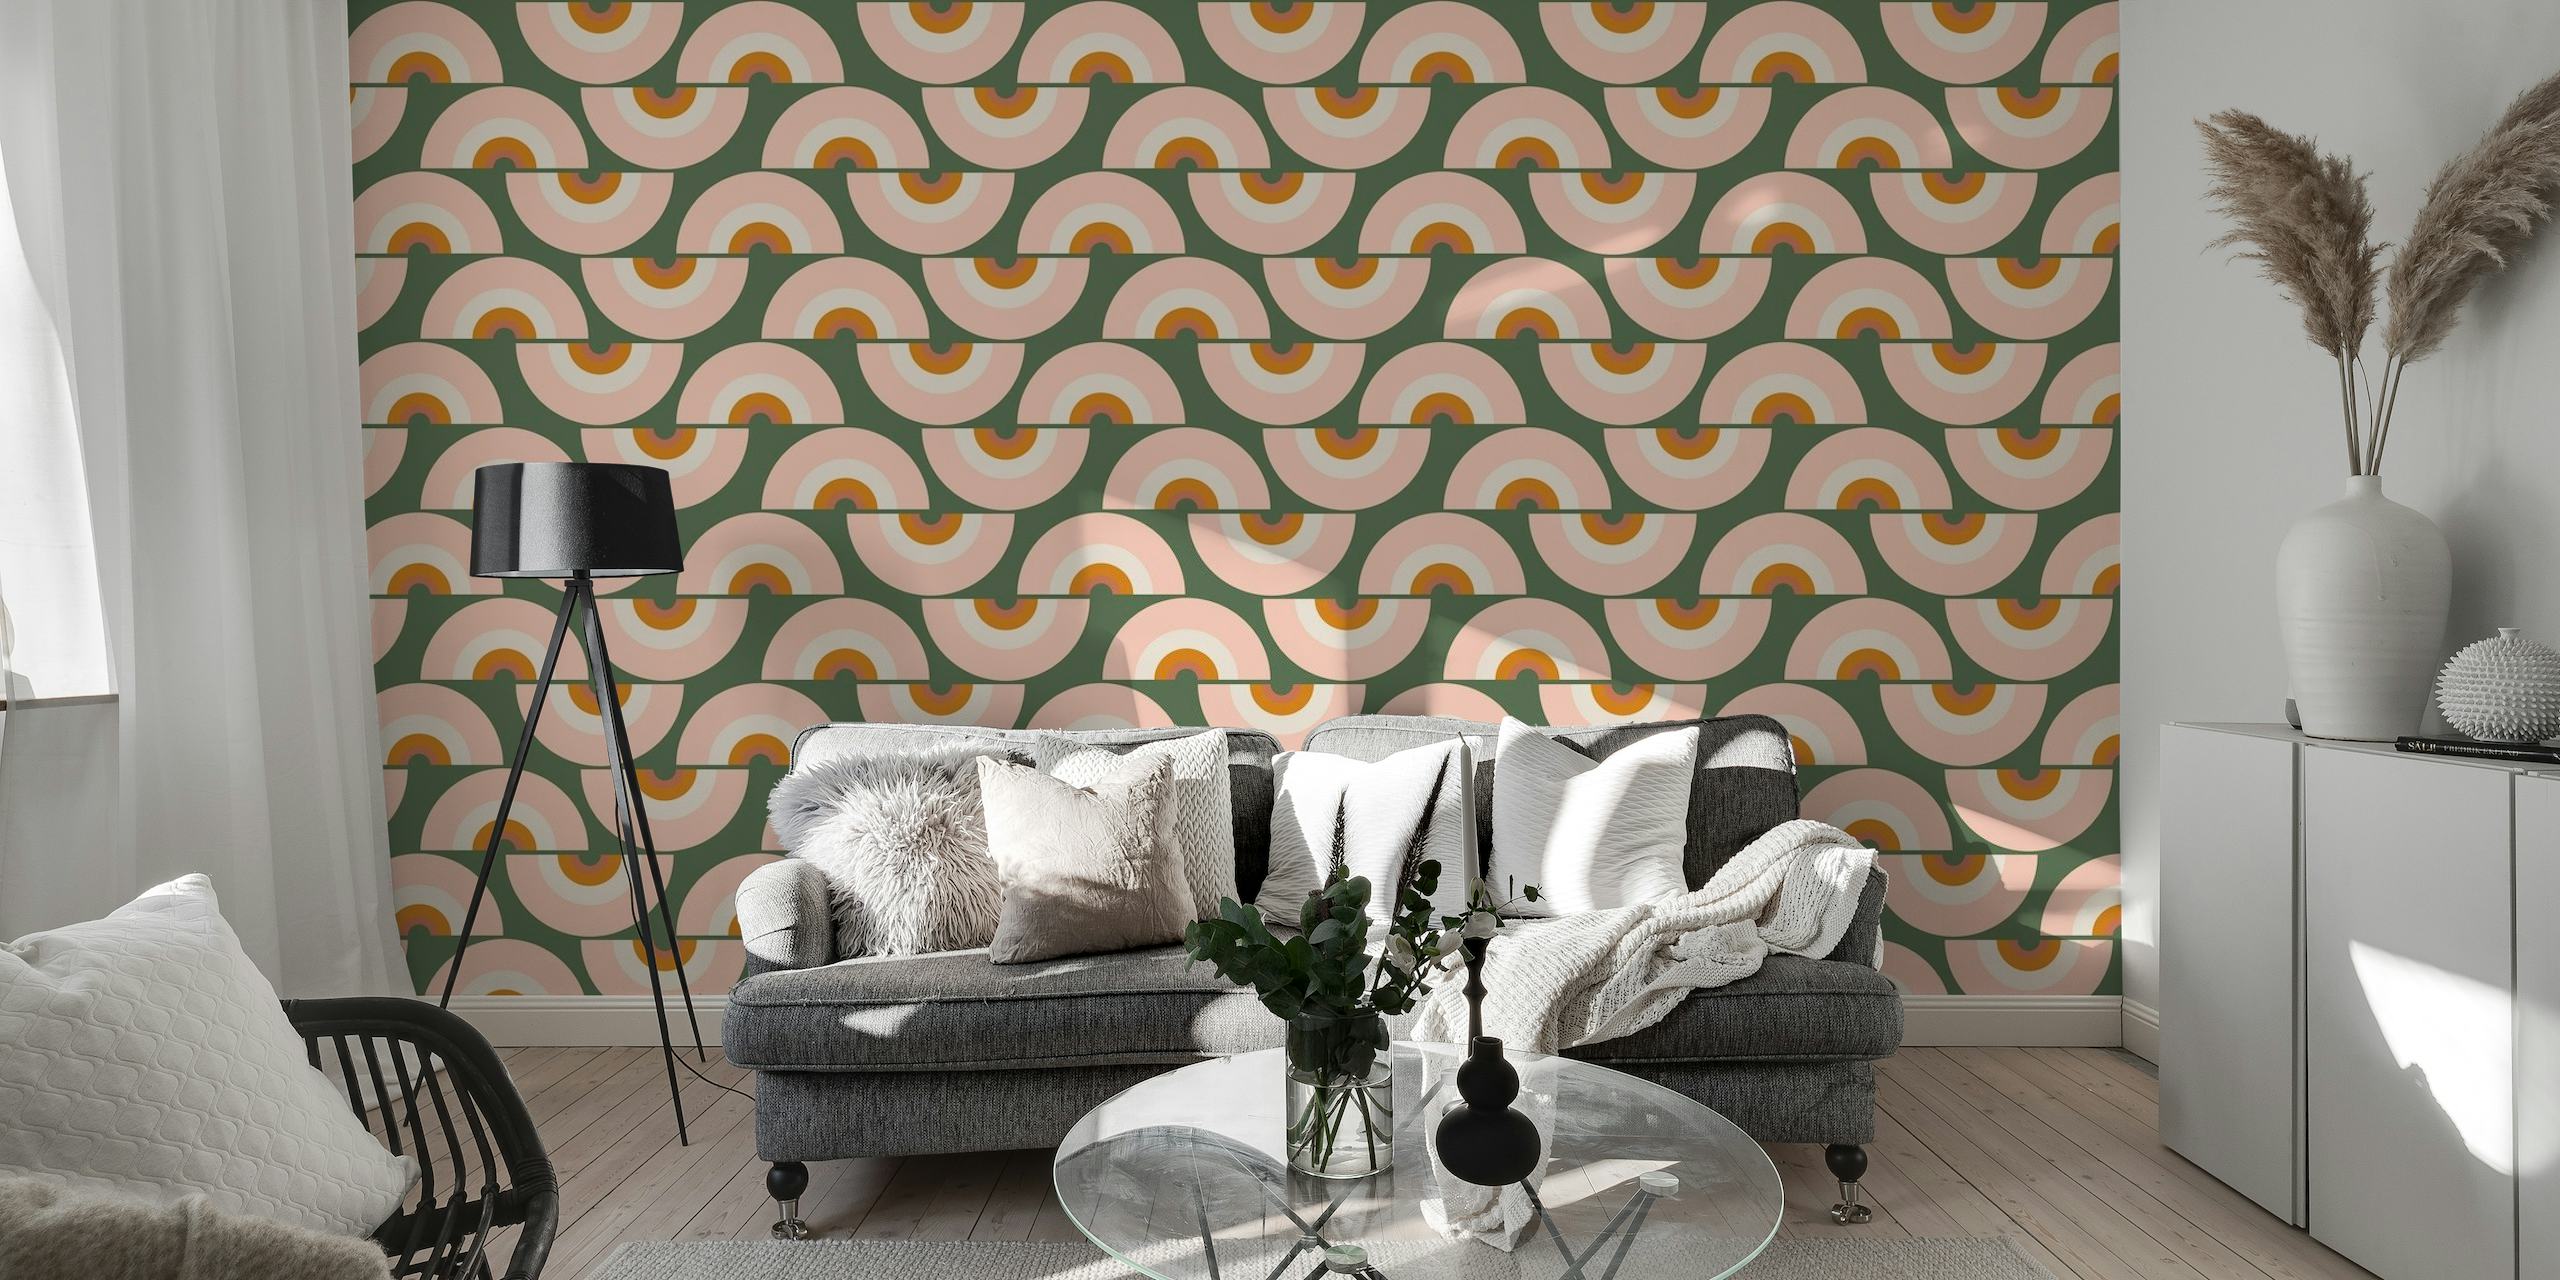 Earth tone rainbow pattern wall mural with arching shapes in earthy colors